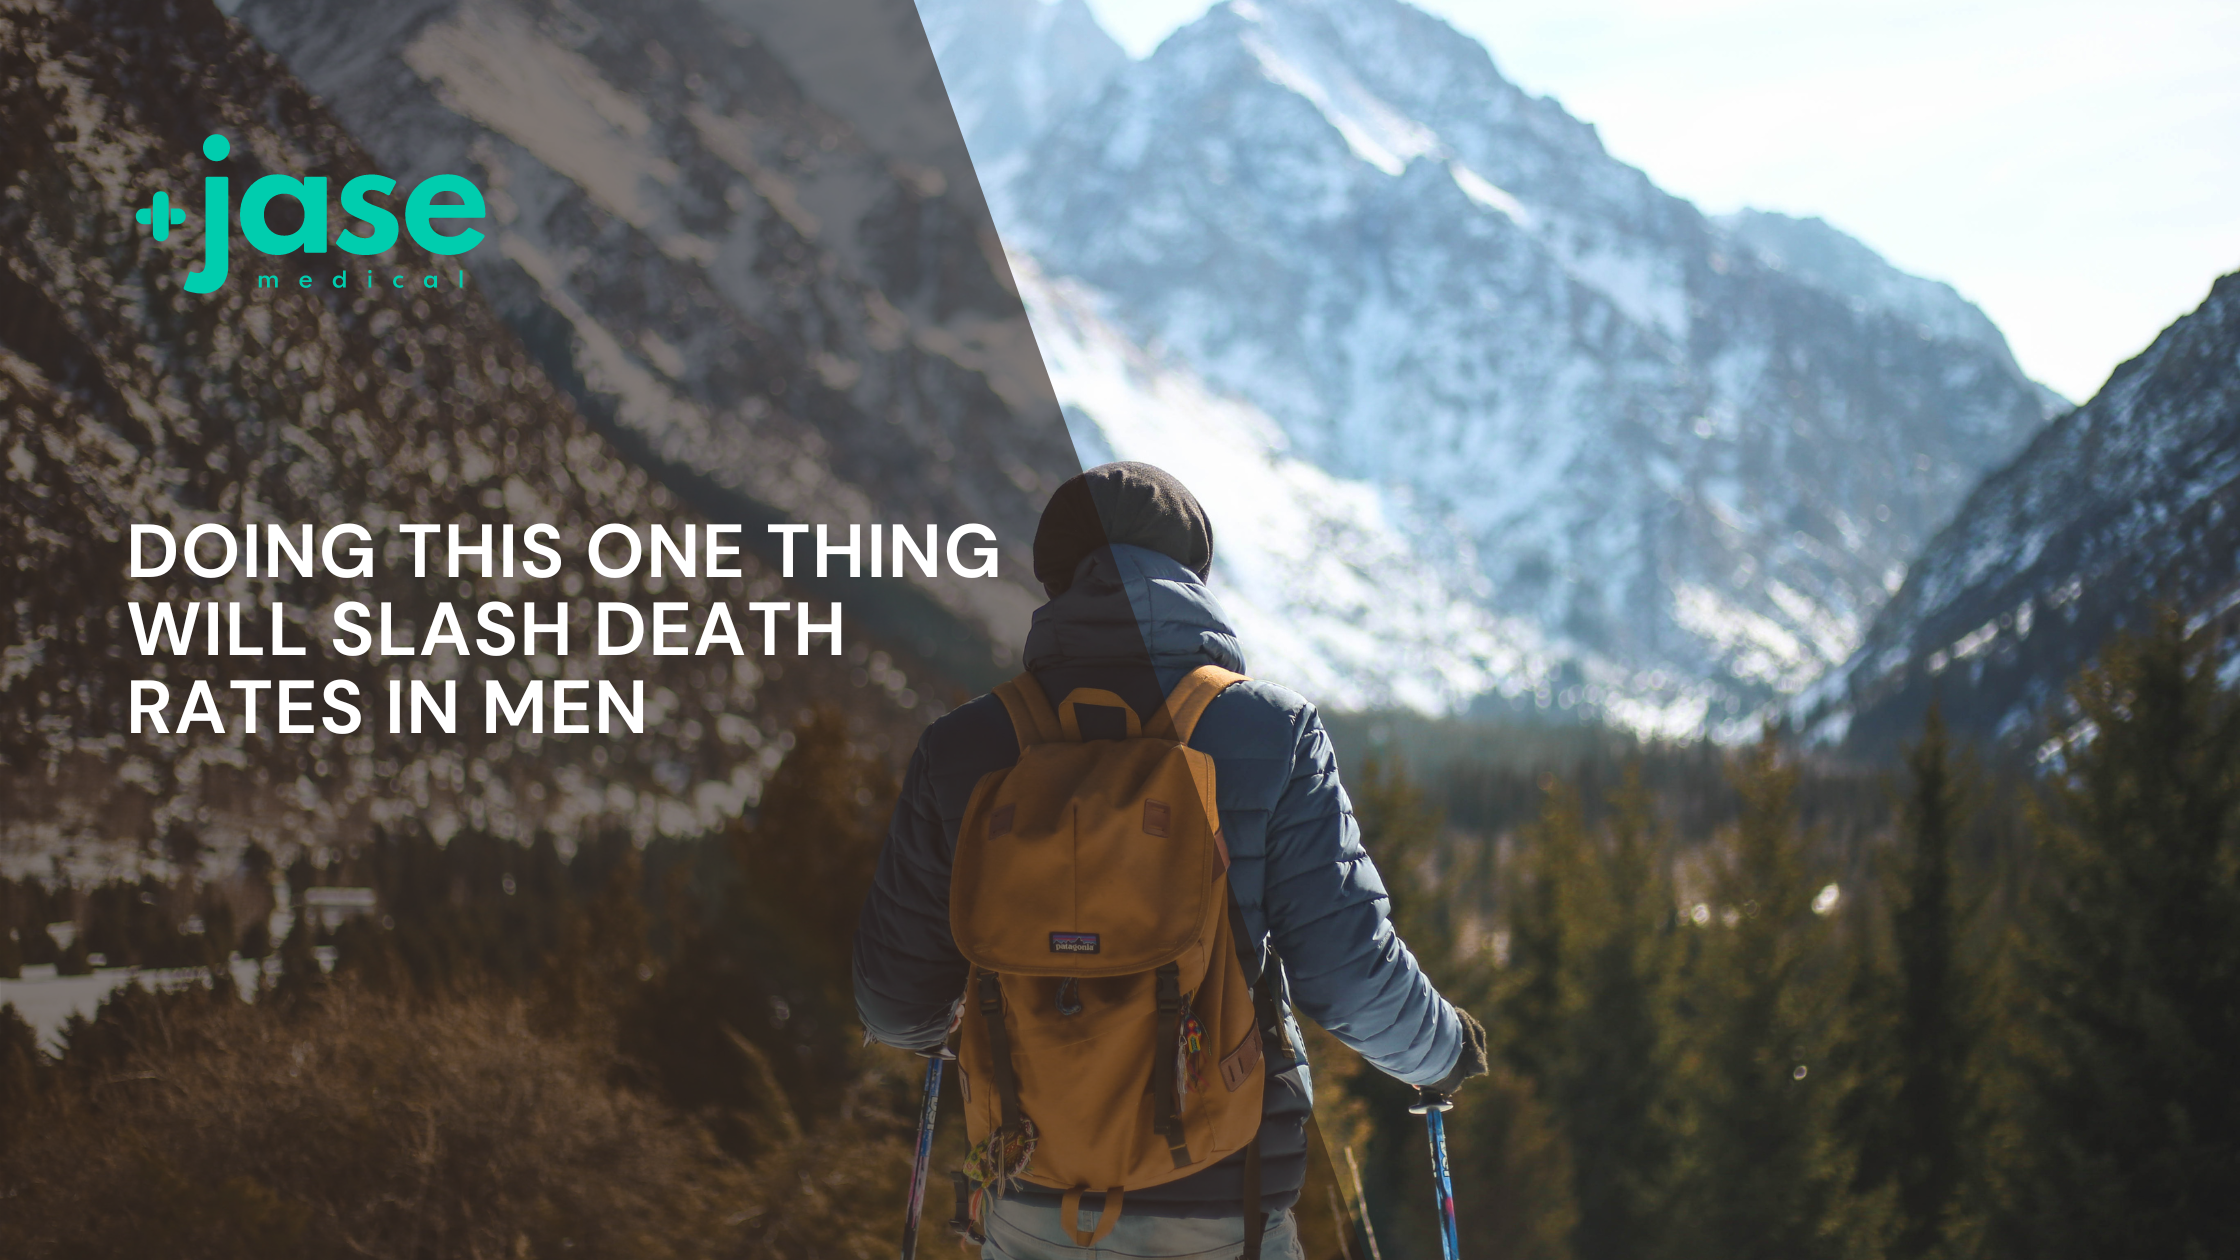 Doing This One Thing Will Slash Death Rates in Men